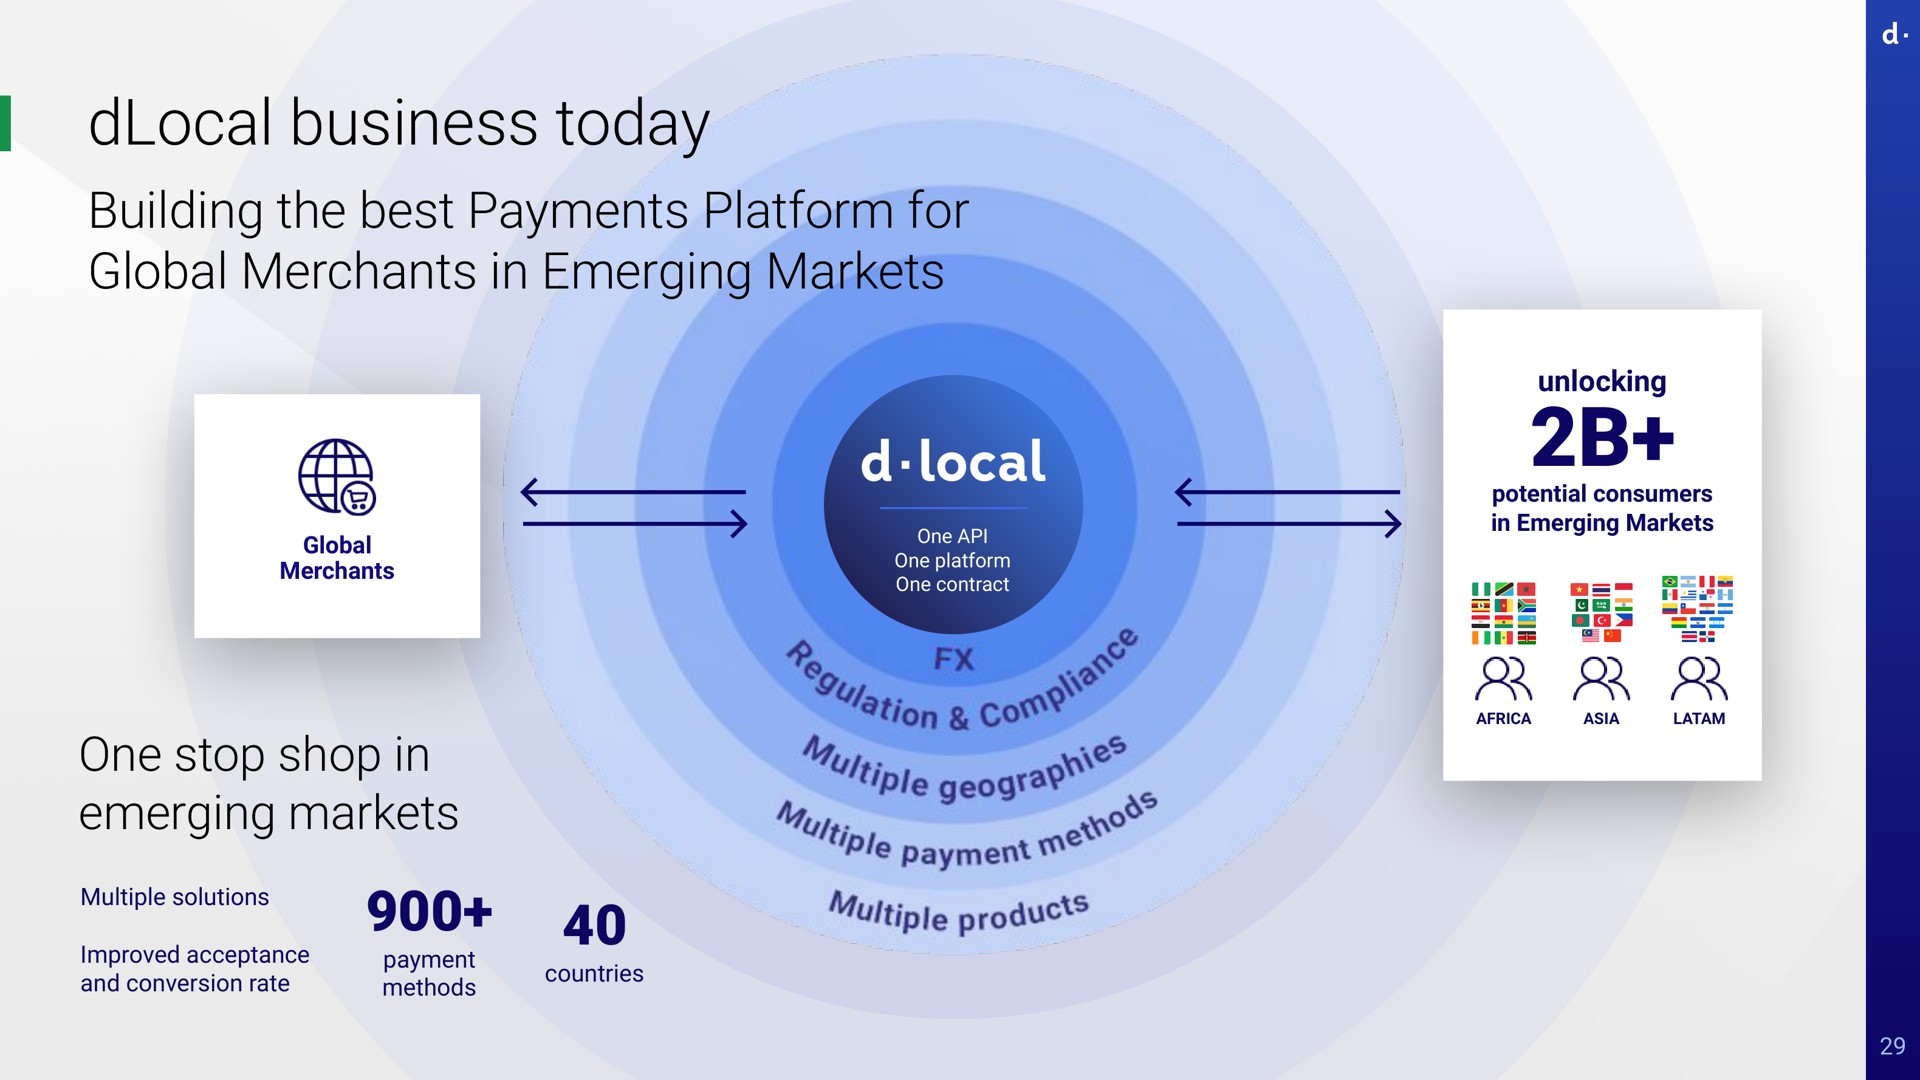 business today building the best payments platform for global merchants in emerging markets global merchants one one platform one contract one stop shop in emerging markets multiple solutions improved acceptance and conversion rate payment methods countries unlocking potential consumers in emerging markets tae tiple mere ere a a lata see ging product | dLocal